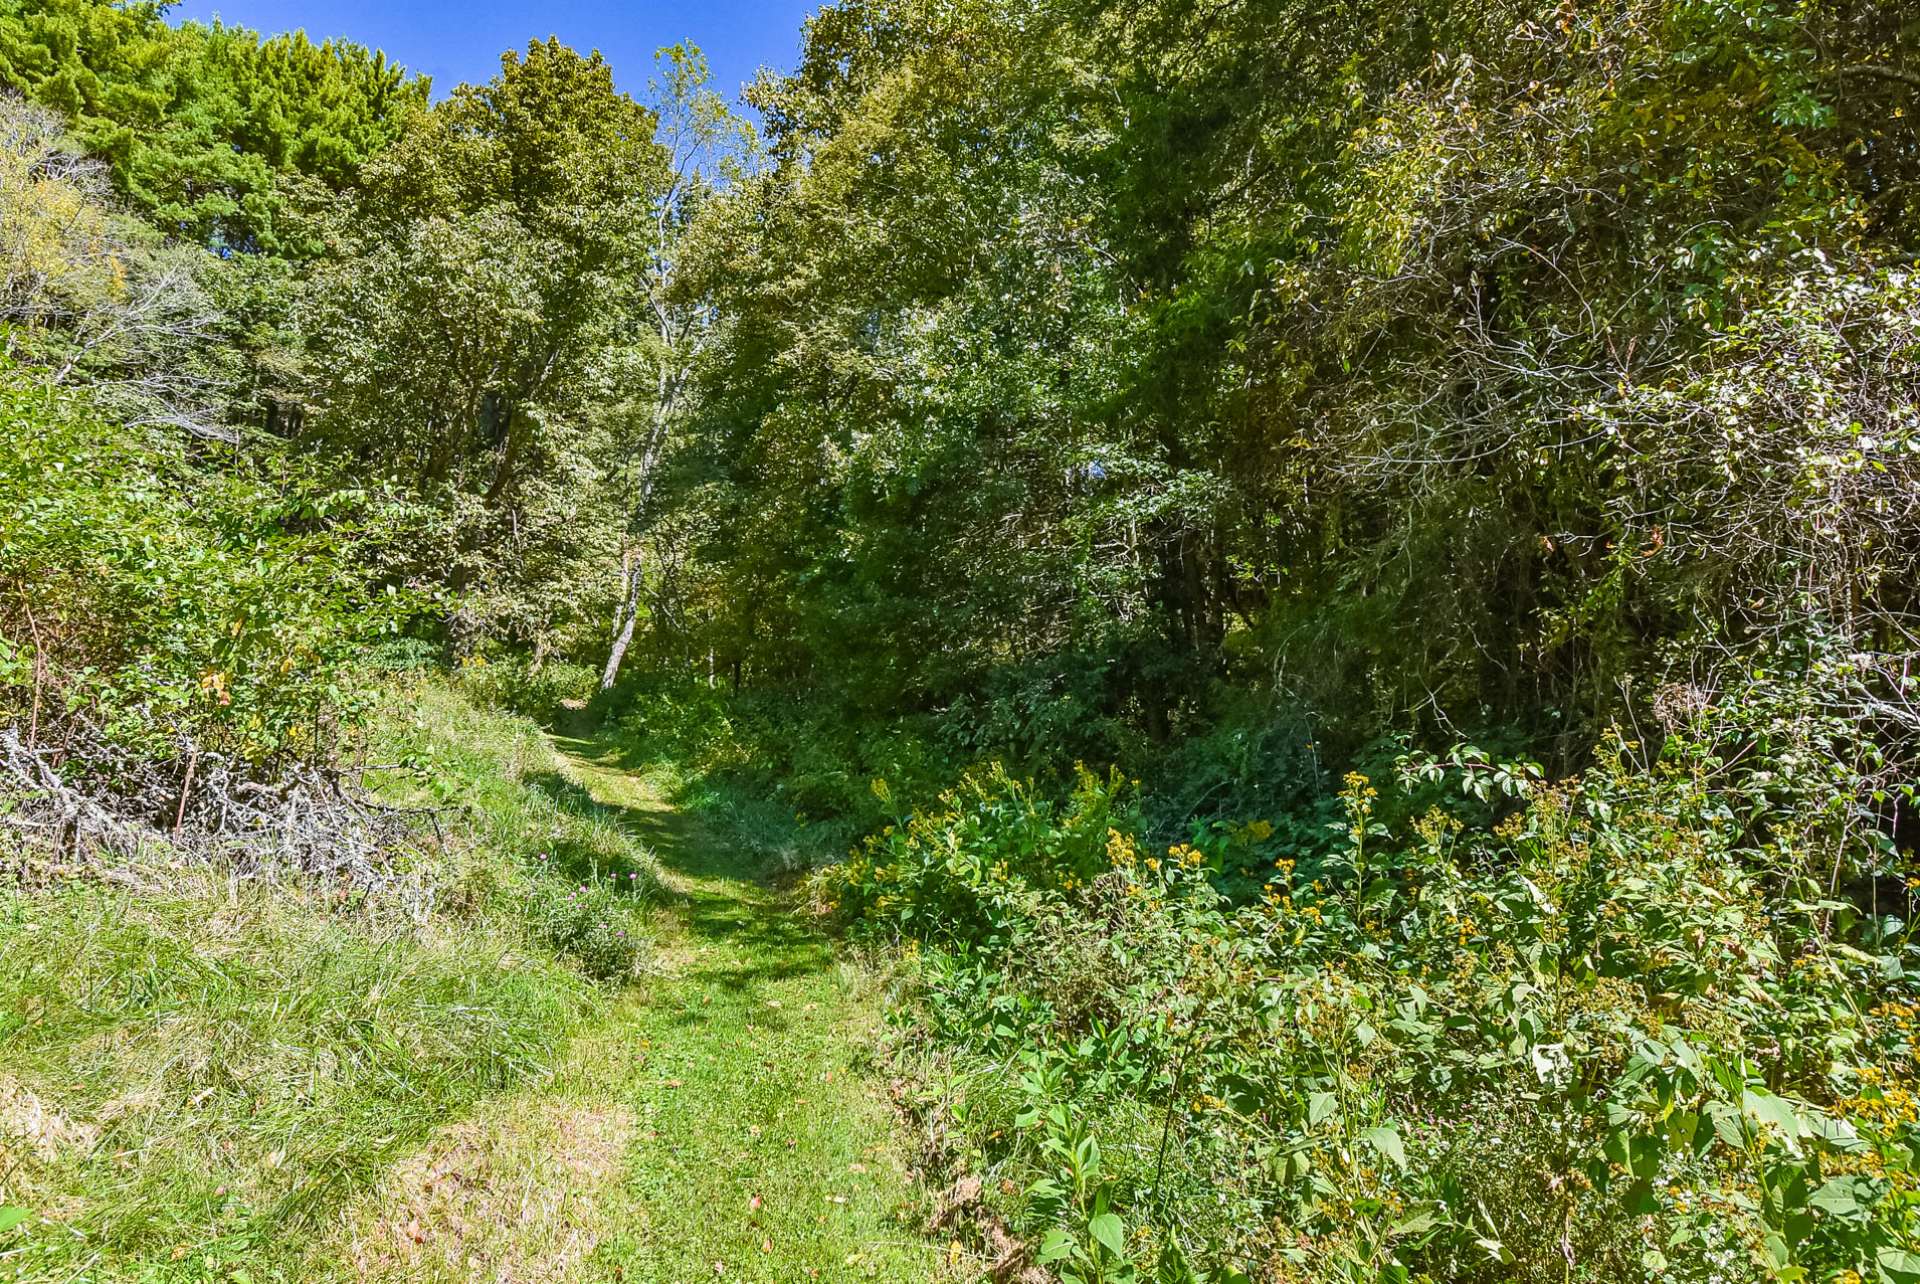 Feel like a hike? This property offers trails that wind through the woodlands creating wonderful hiking, exploring, ATV, or horseback adventures.